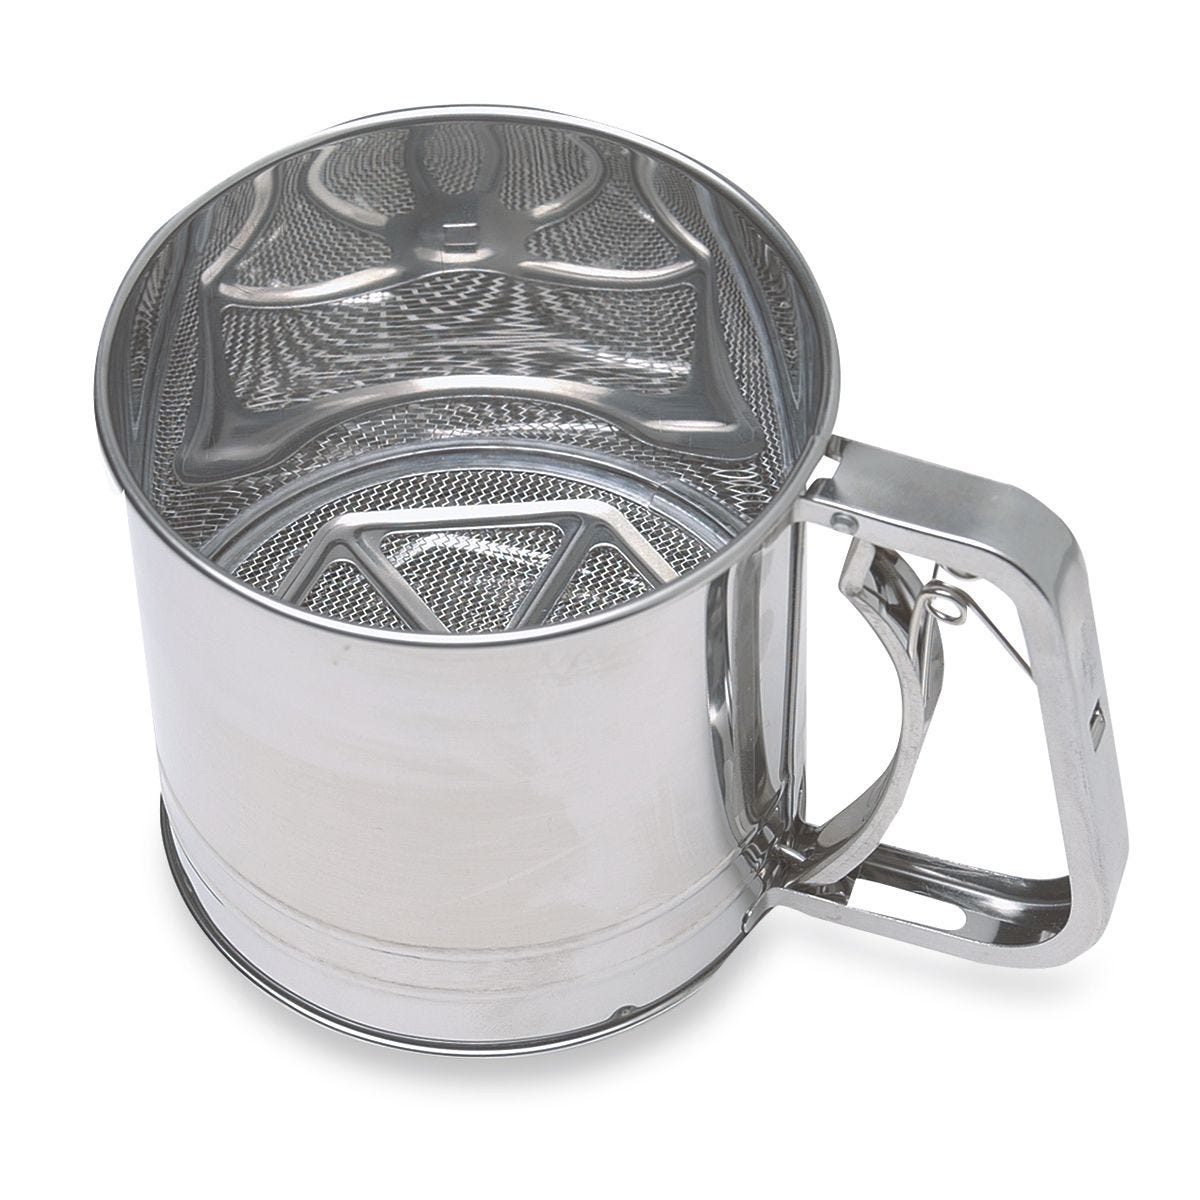 Battery Operated Pastry Flour Sifter Stainless Steel Fine Mesh